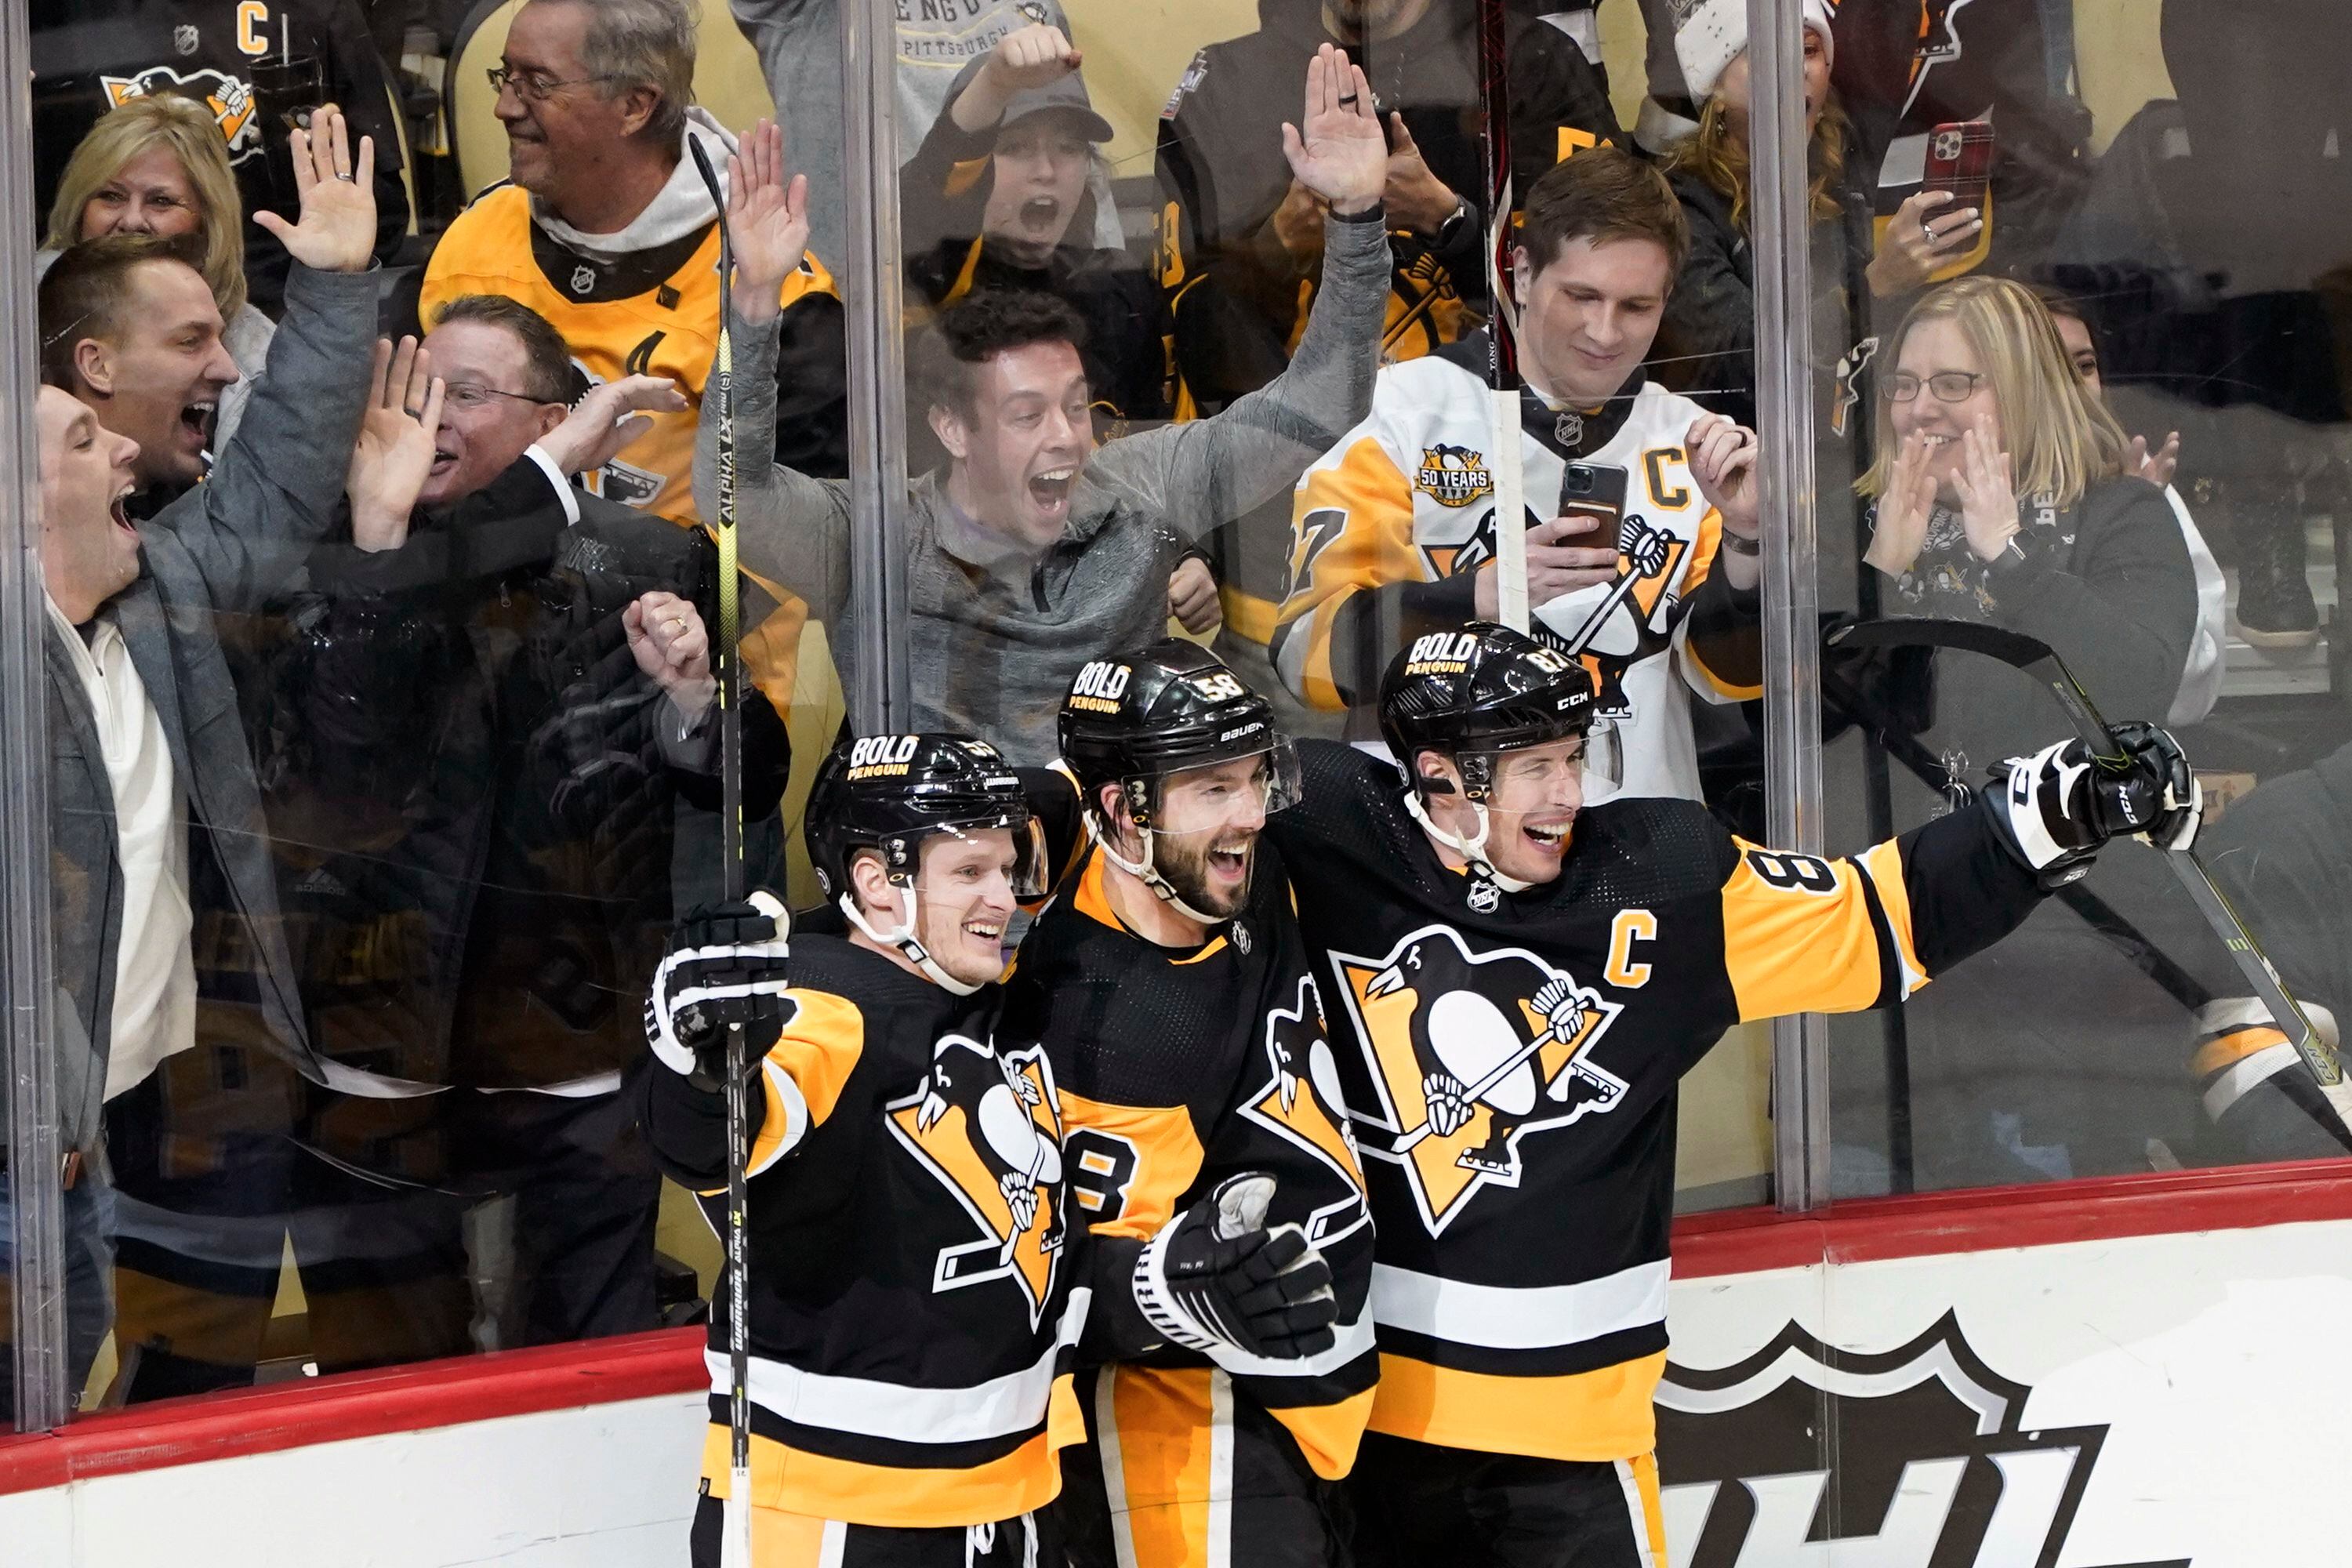 Penguins' center depth to rely on Carter with Crosby, Malkin out